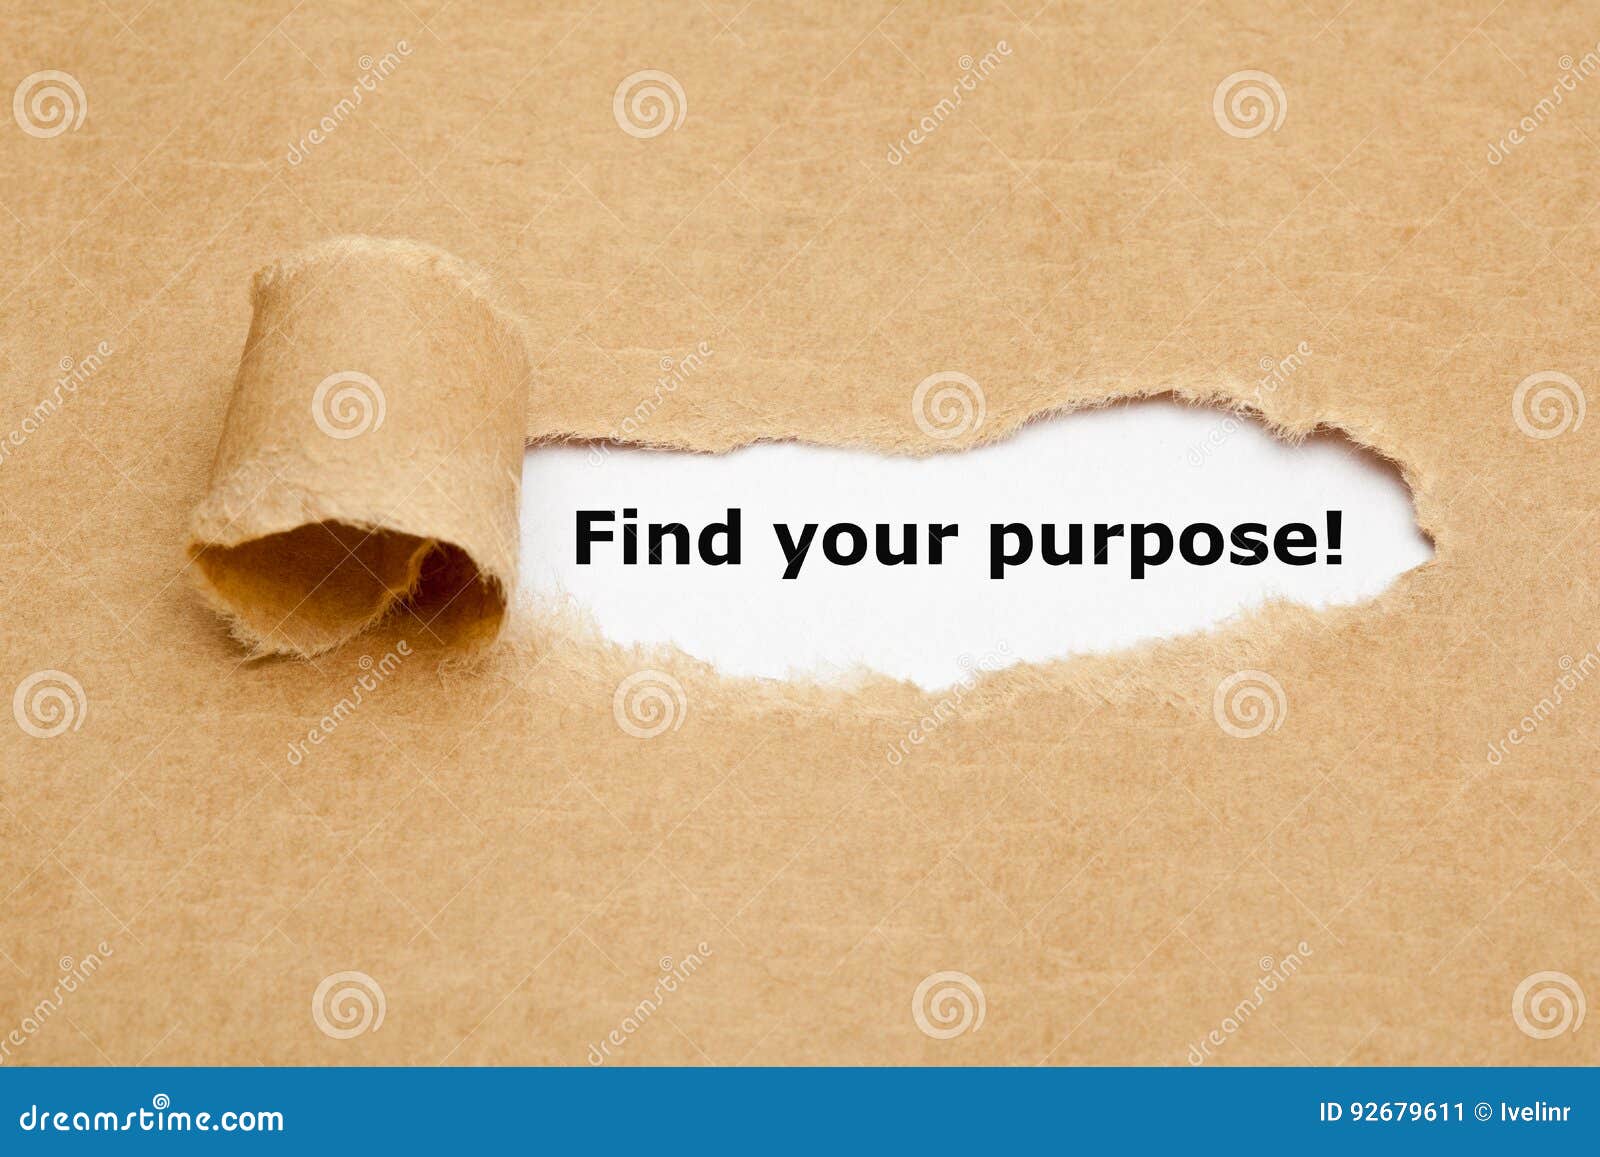 find your purpose torn paper